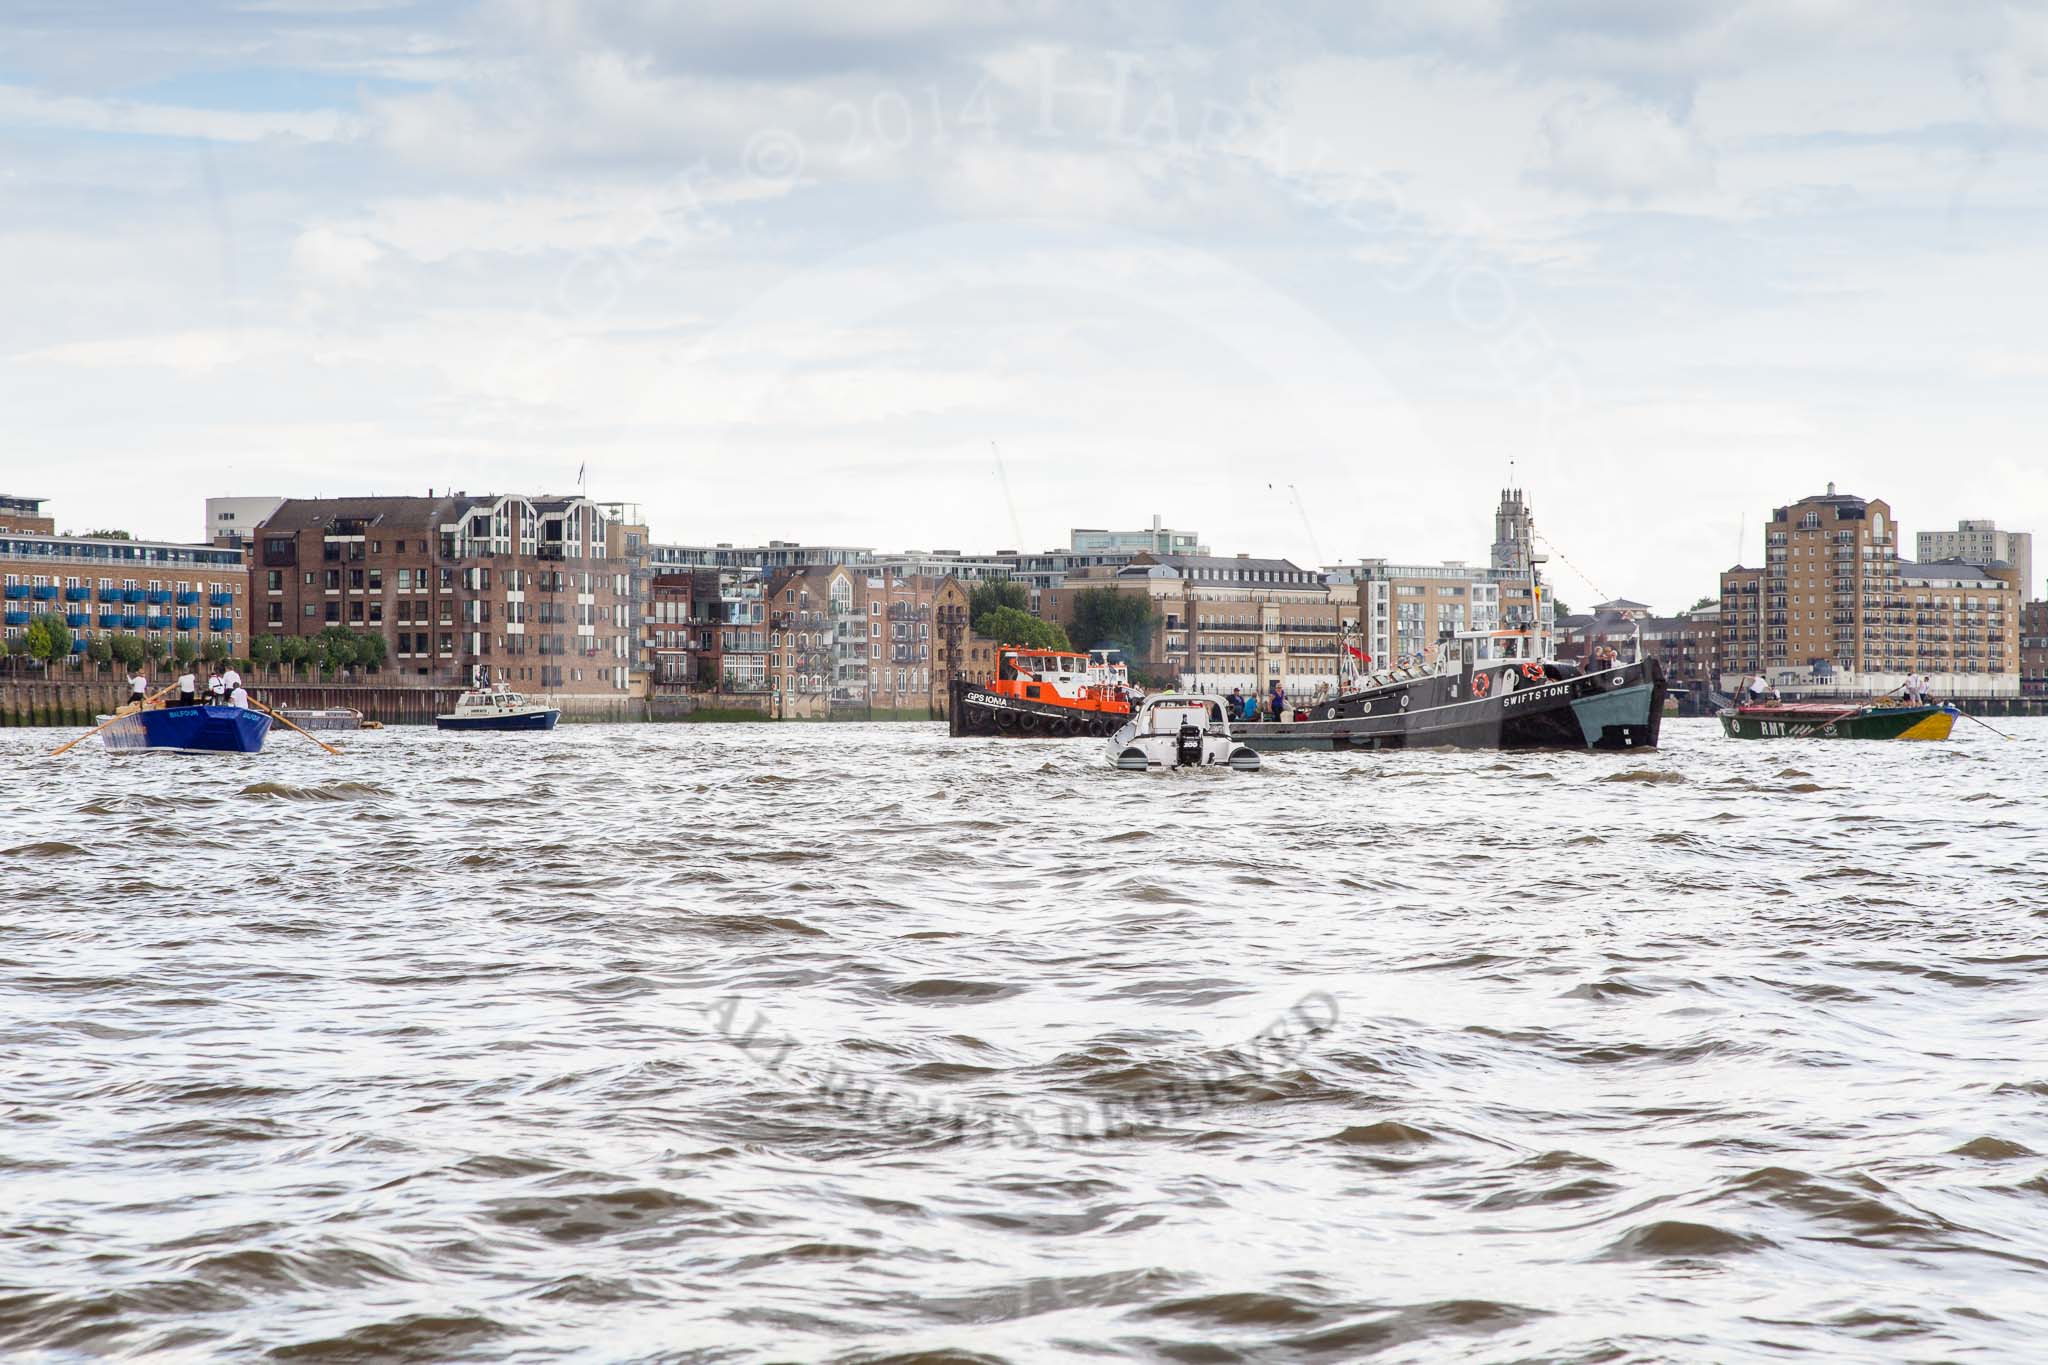 TOW River Thames Barge Driving Race 2014.
River Thames between Greenwich and Westminster,
London,

United Kingdom,
on 28 June 2014 at 13:11, image #202